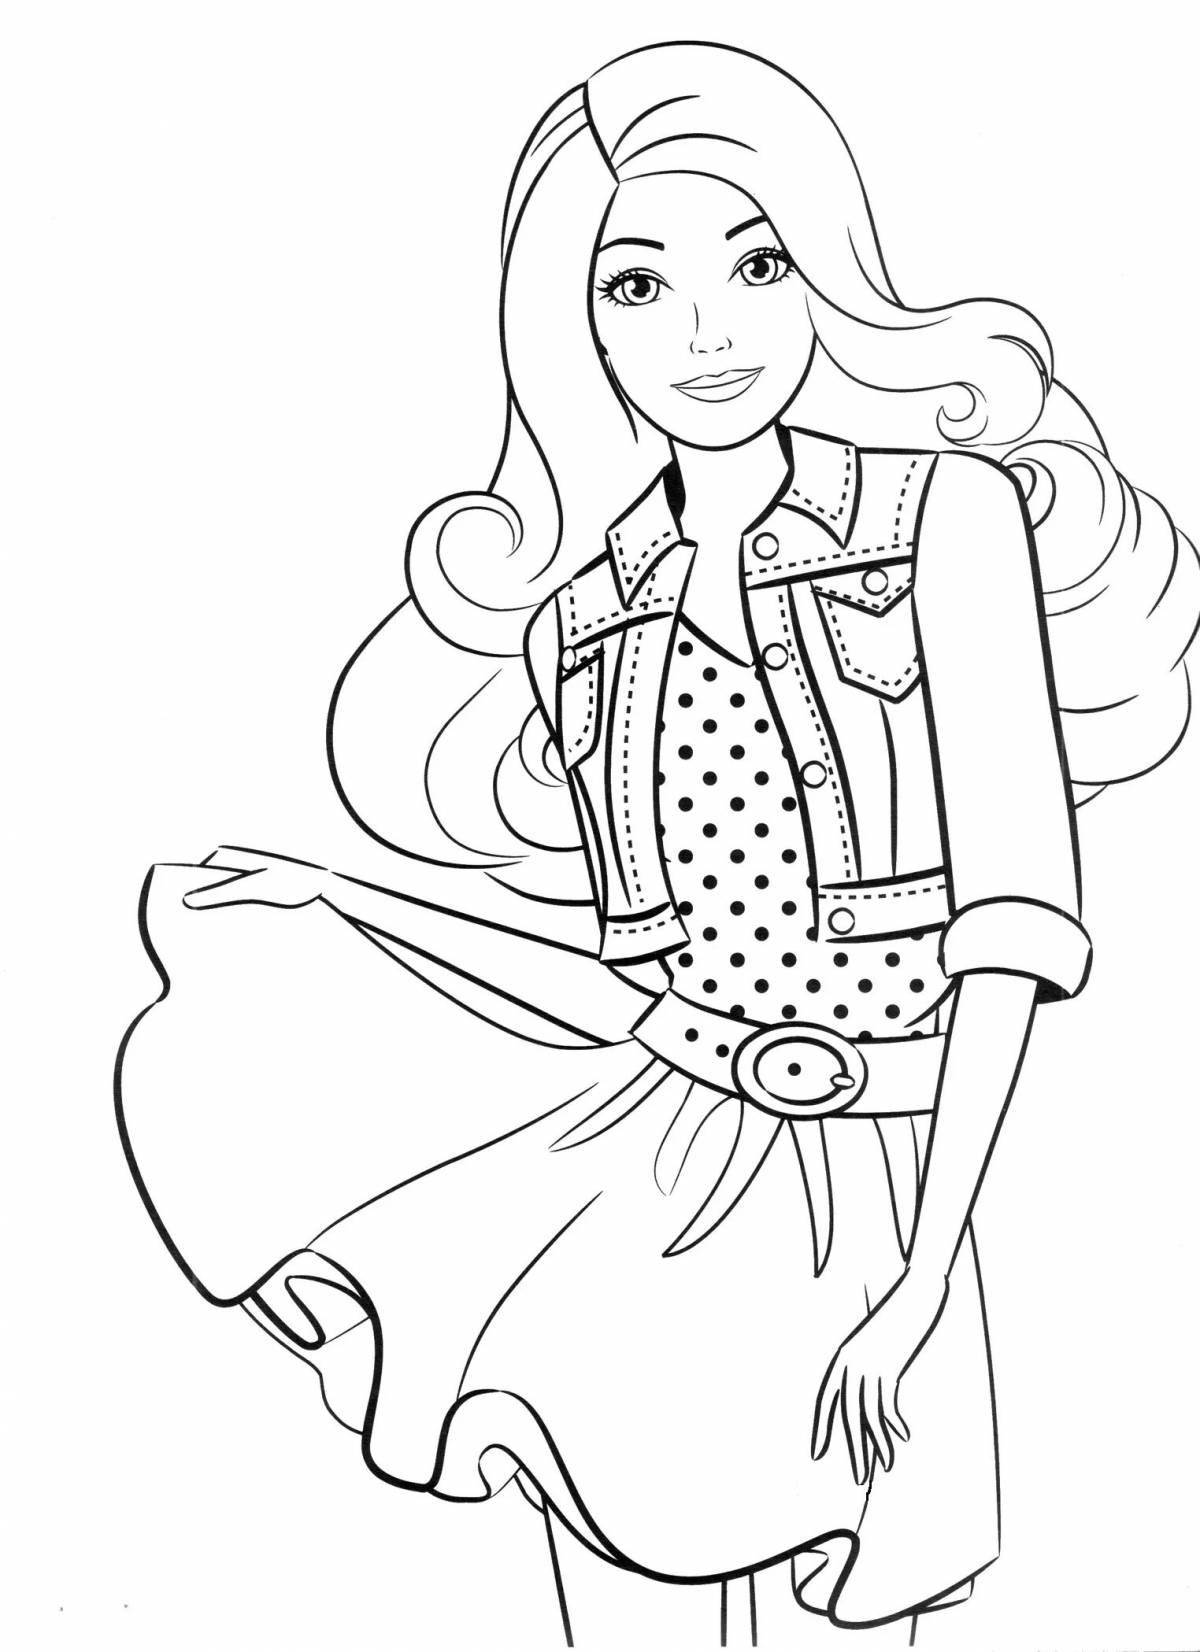 Shiny barbie painting coloring book